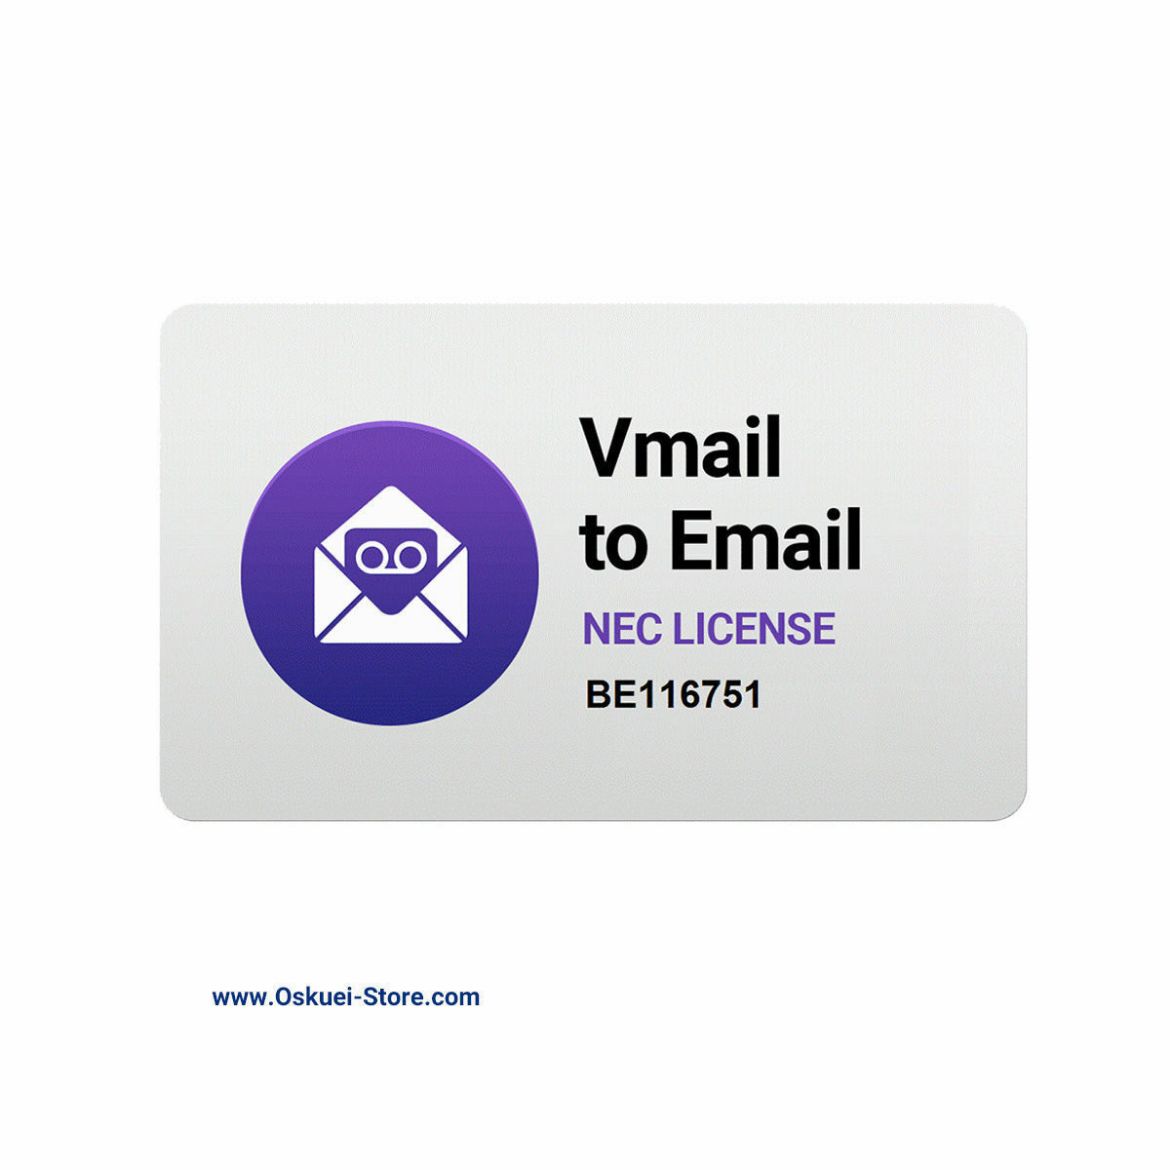 SL2100 Vmail to Email Notification NEC License